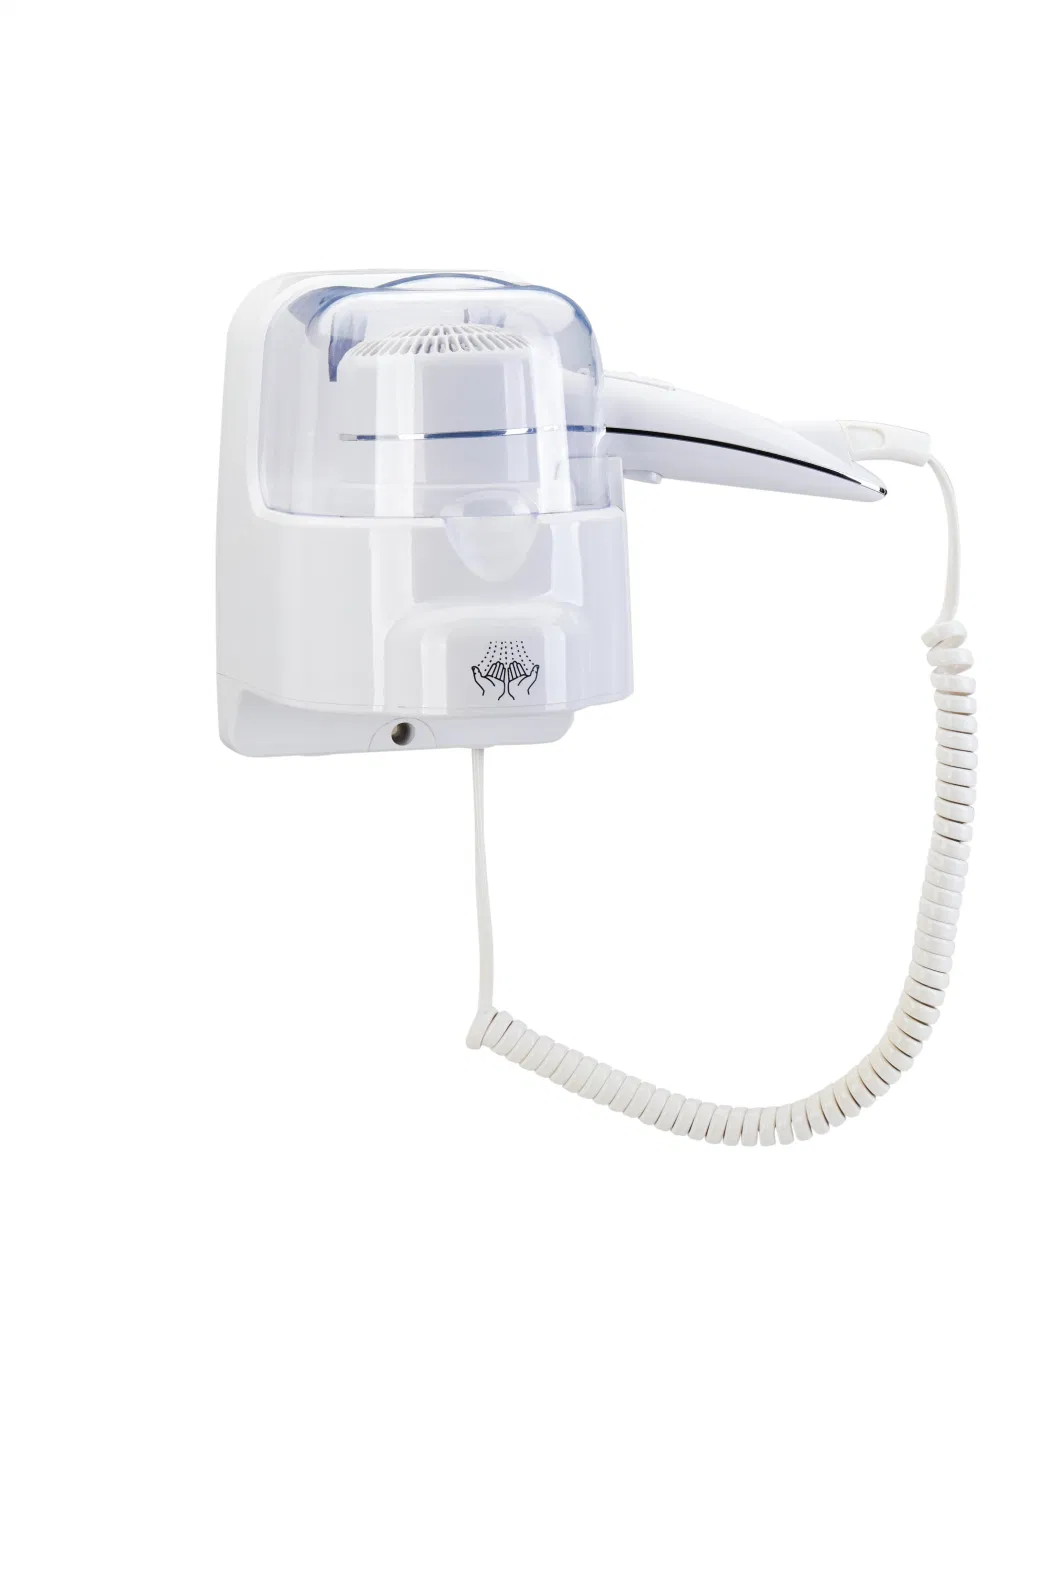 Wall-Mounted Hair Dryer Professional Electric Appliance Wall-Mounted Hand Dryer 1200W Plastic